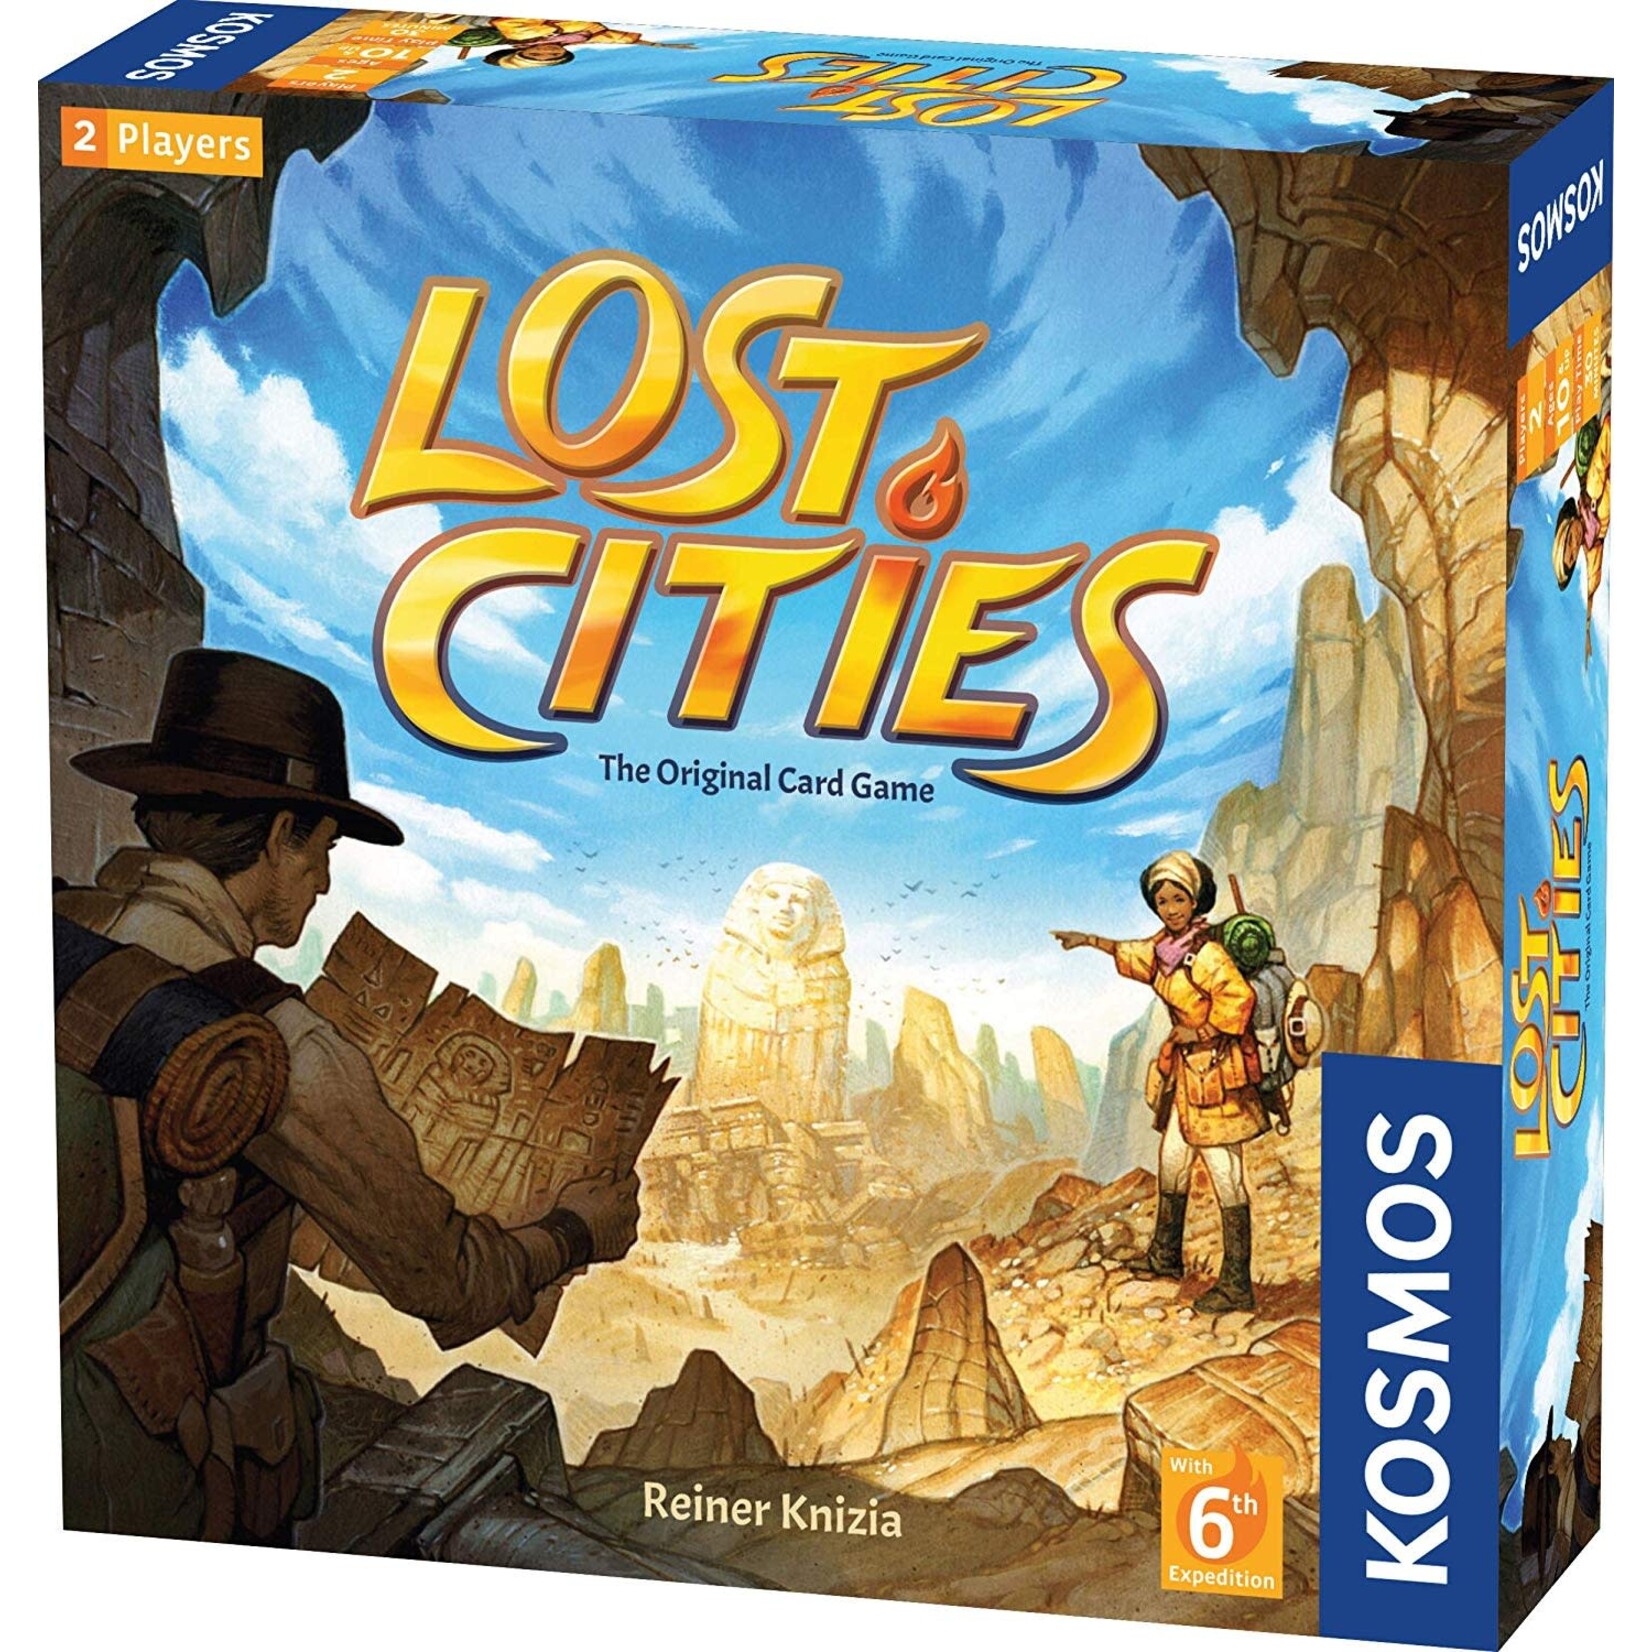 Thames & Kosmos Lost Cities 6th Expedition